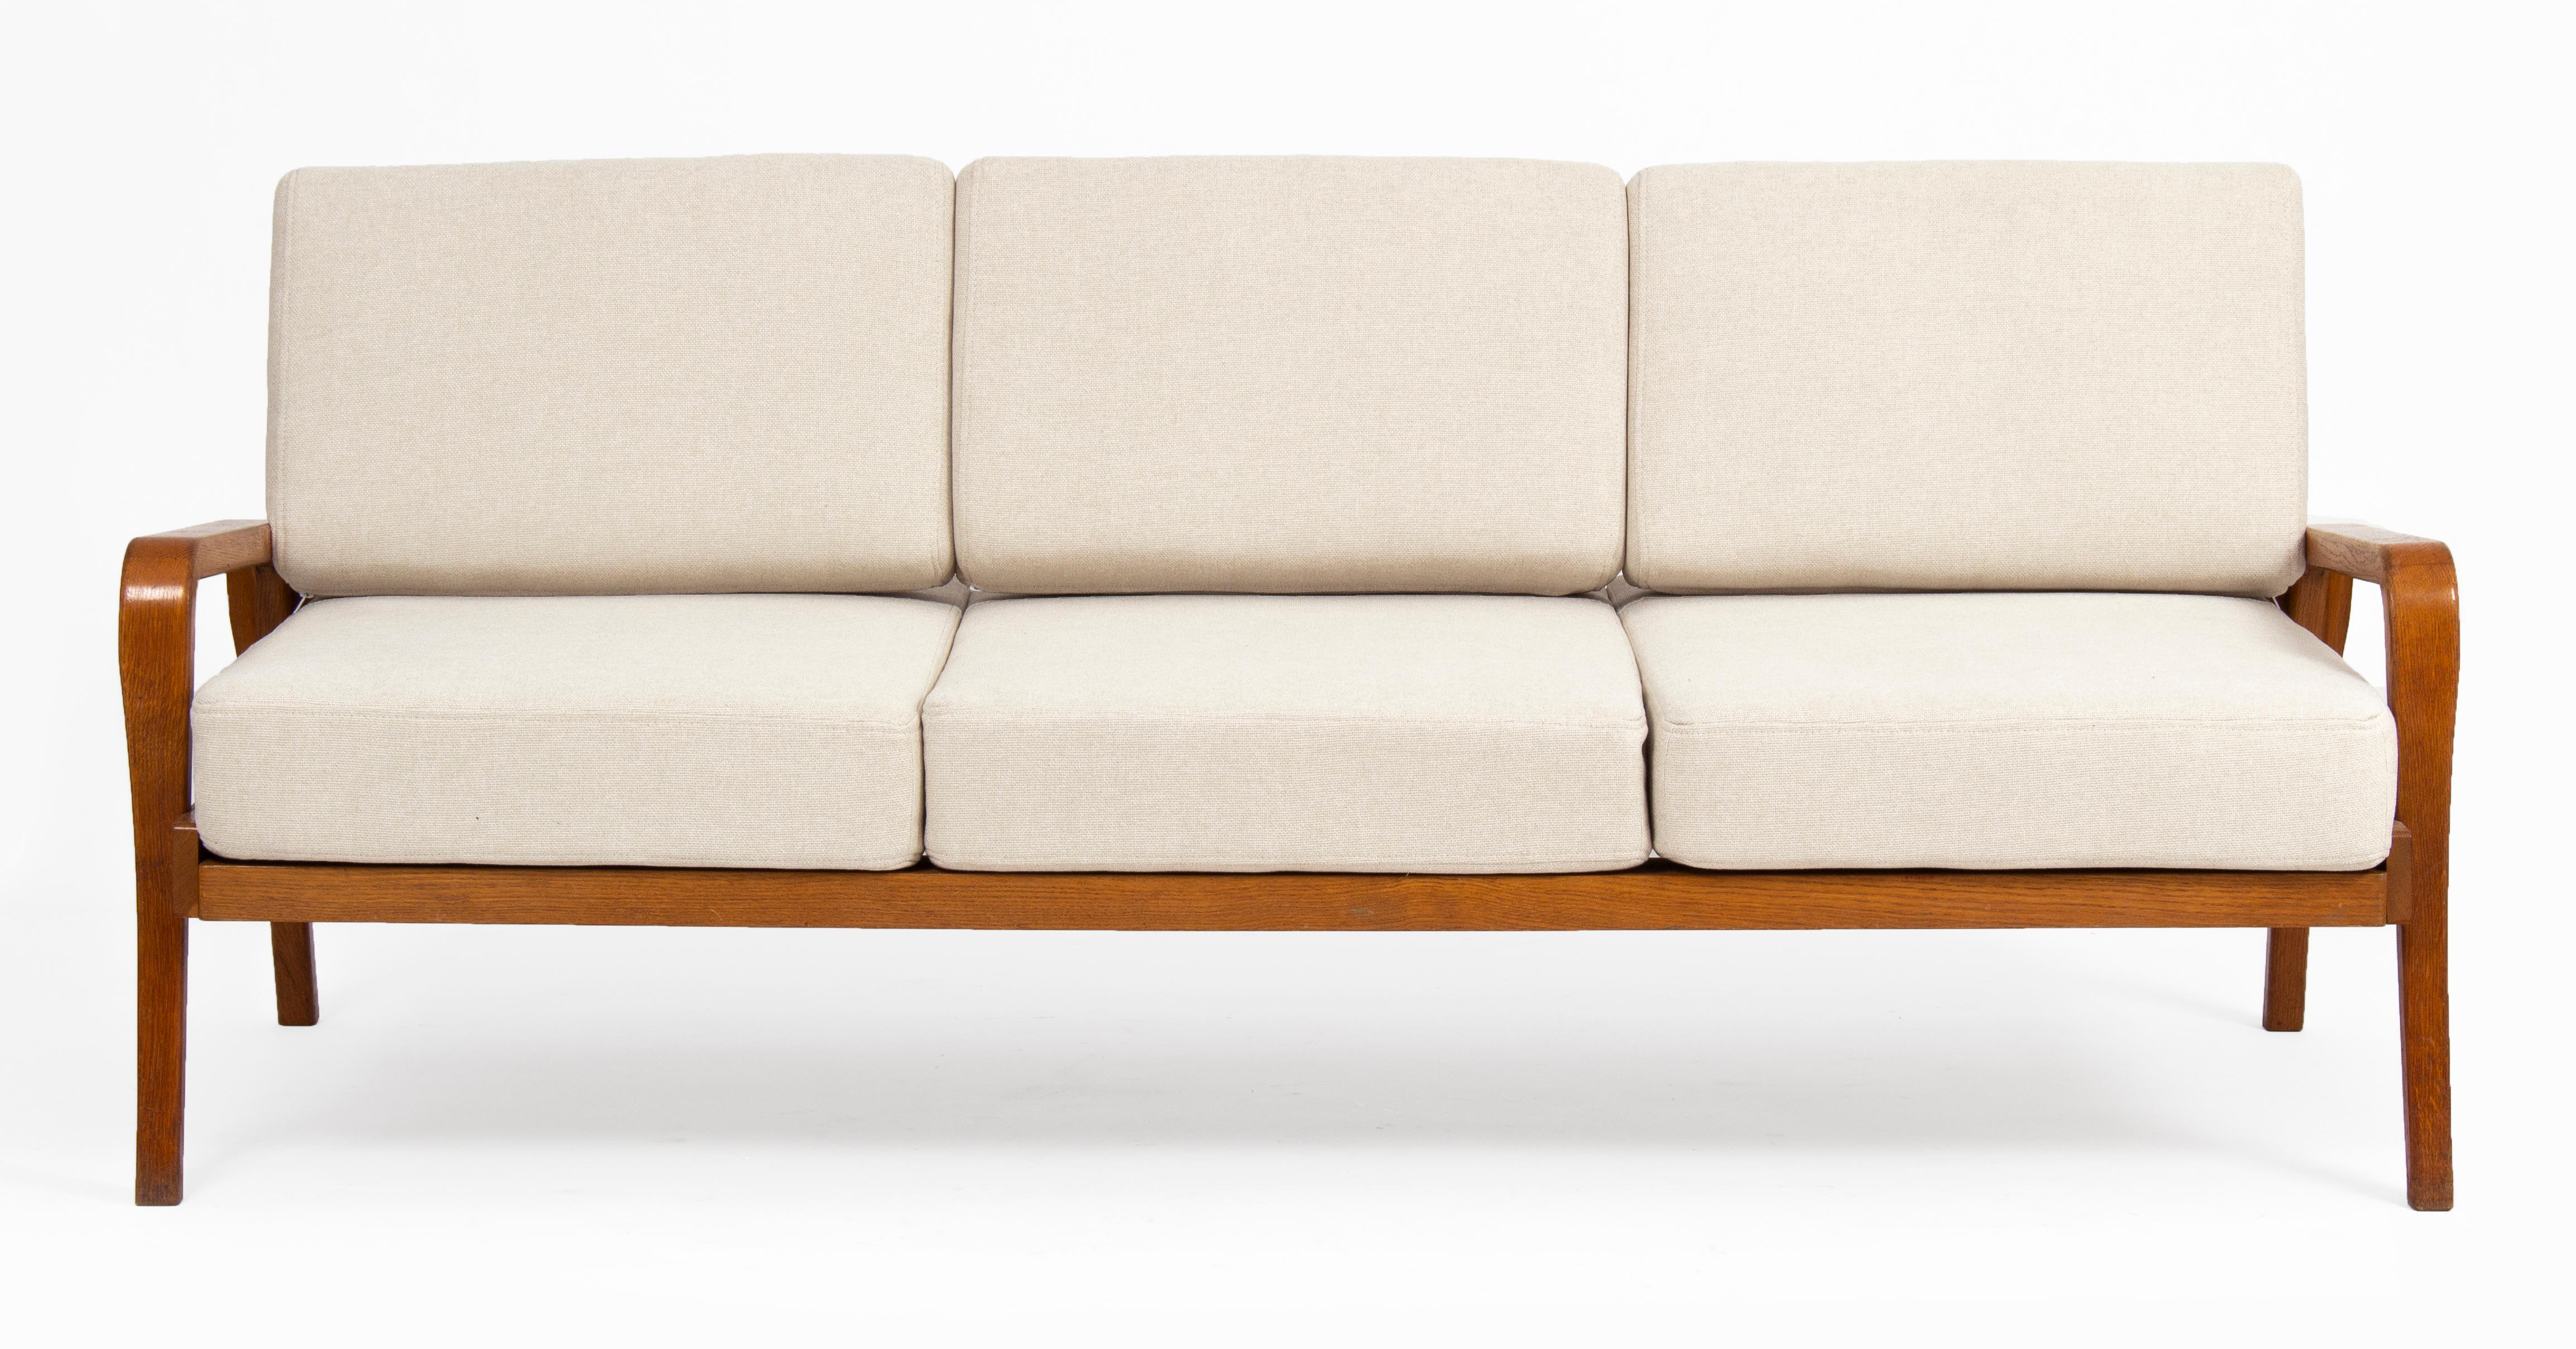 The sofa designed by Karel Kozelka and Antonin Kropacek has robust features and a clean design, typical for 1940s Czeck functionalism. The timeless silhouette of the piece makes it fit into both classic and contemporary interiors.

The sofa has